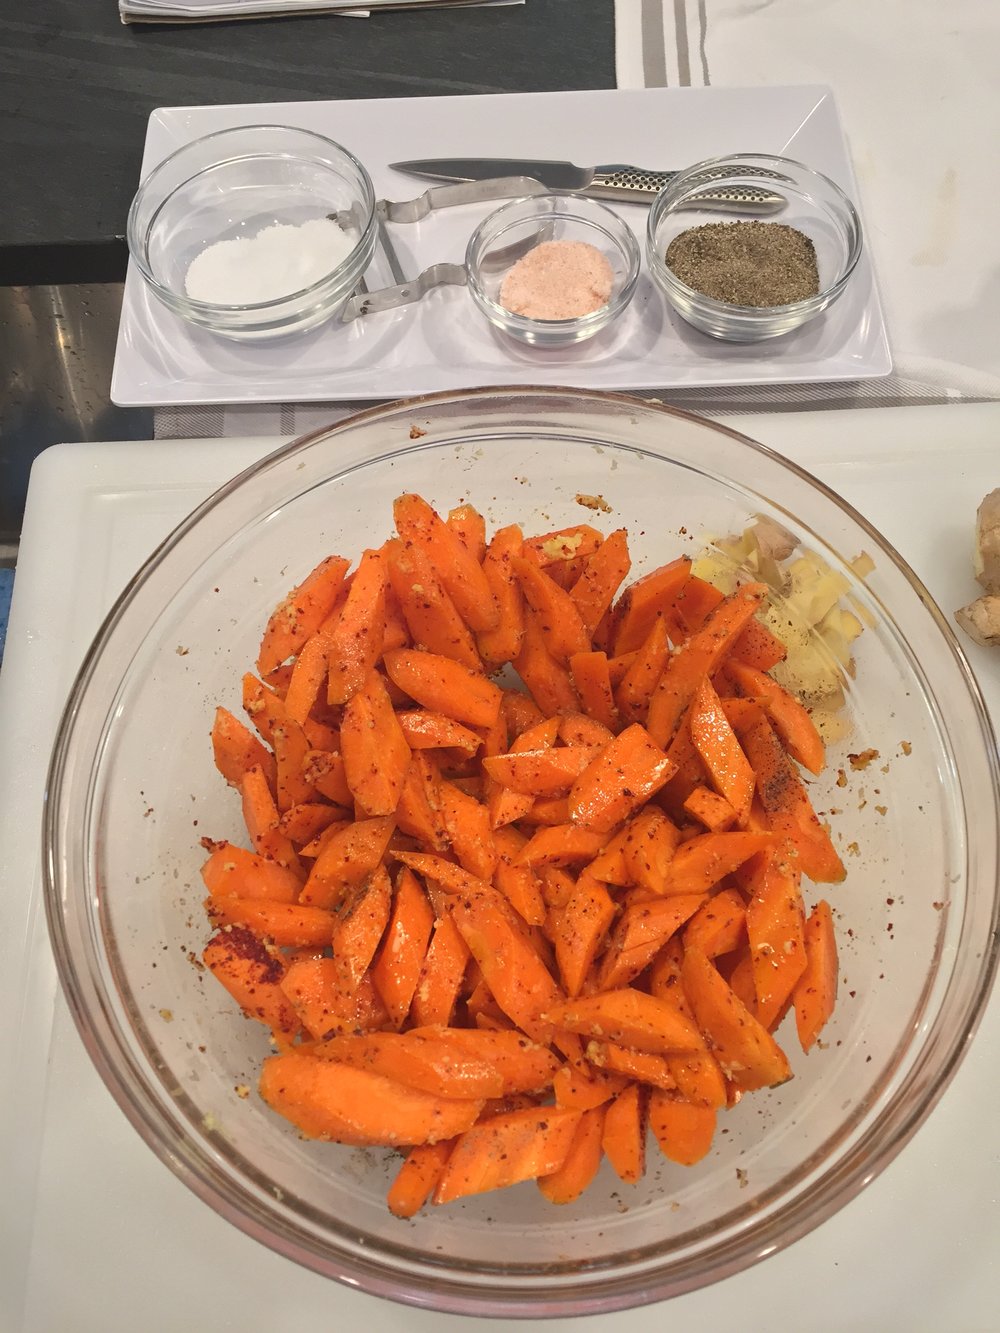 Roasted carrots with spices